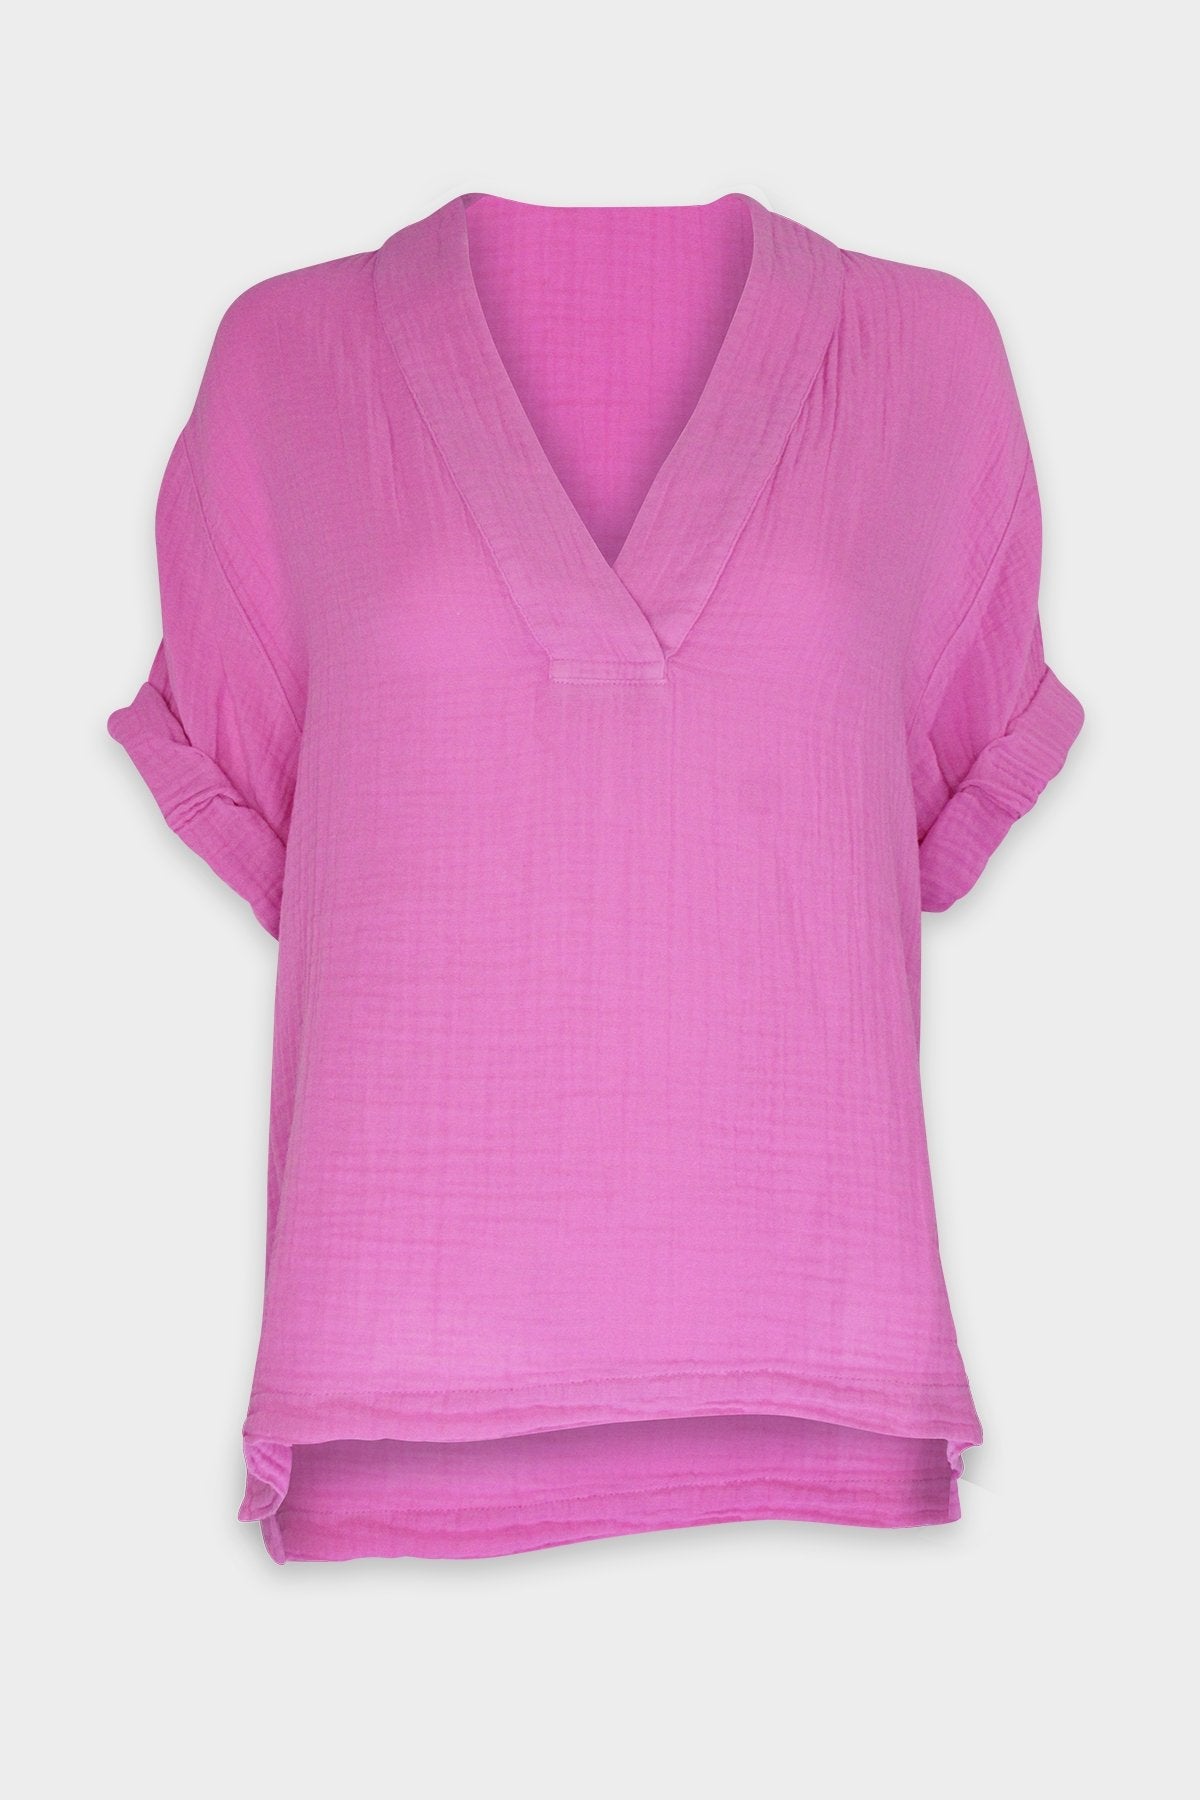 Avery Top in Sunset Pink - shop-olivia.com